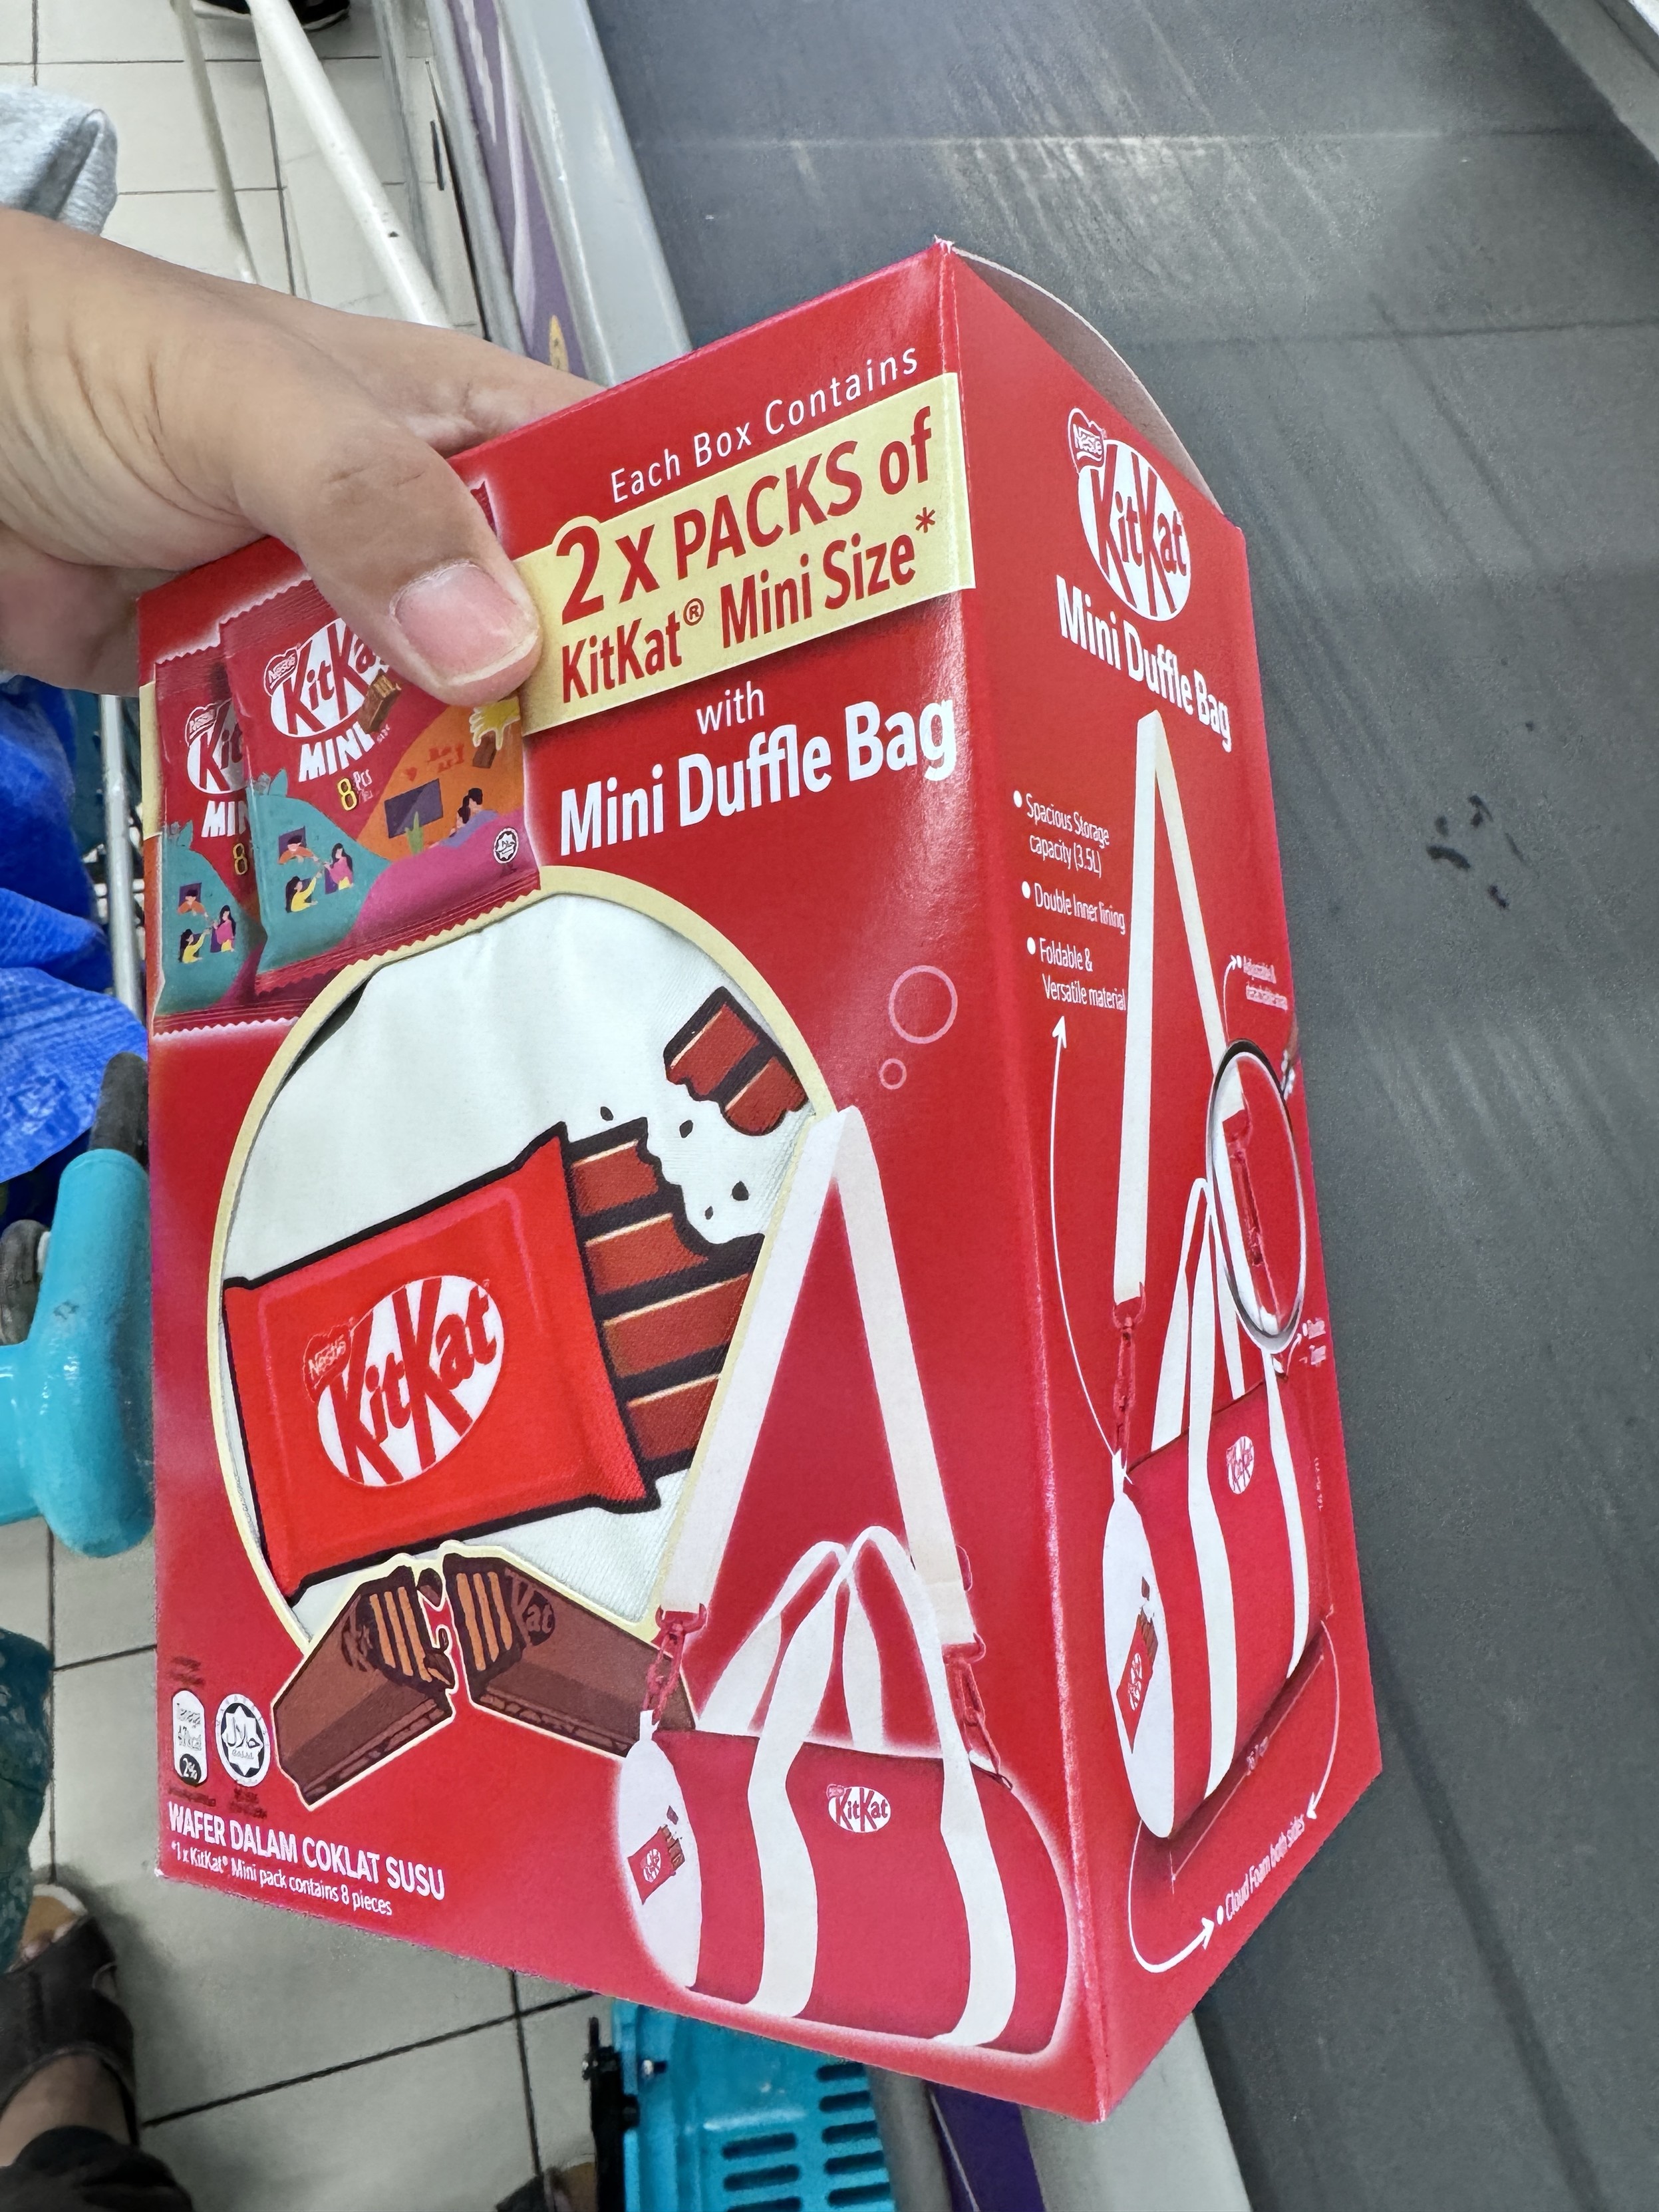 A hand holding a promotional KitKat box that contains two packs of mini-sized KitKats and a mini duffle bag.